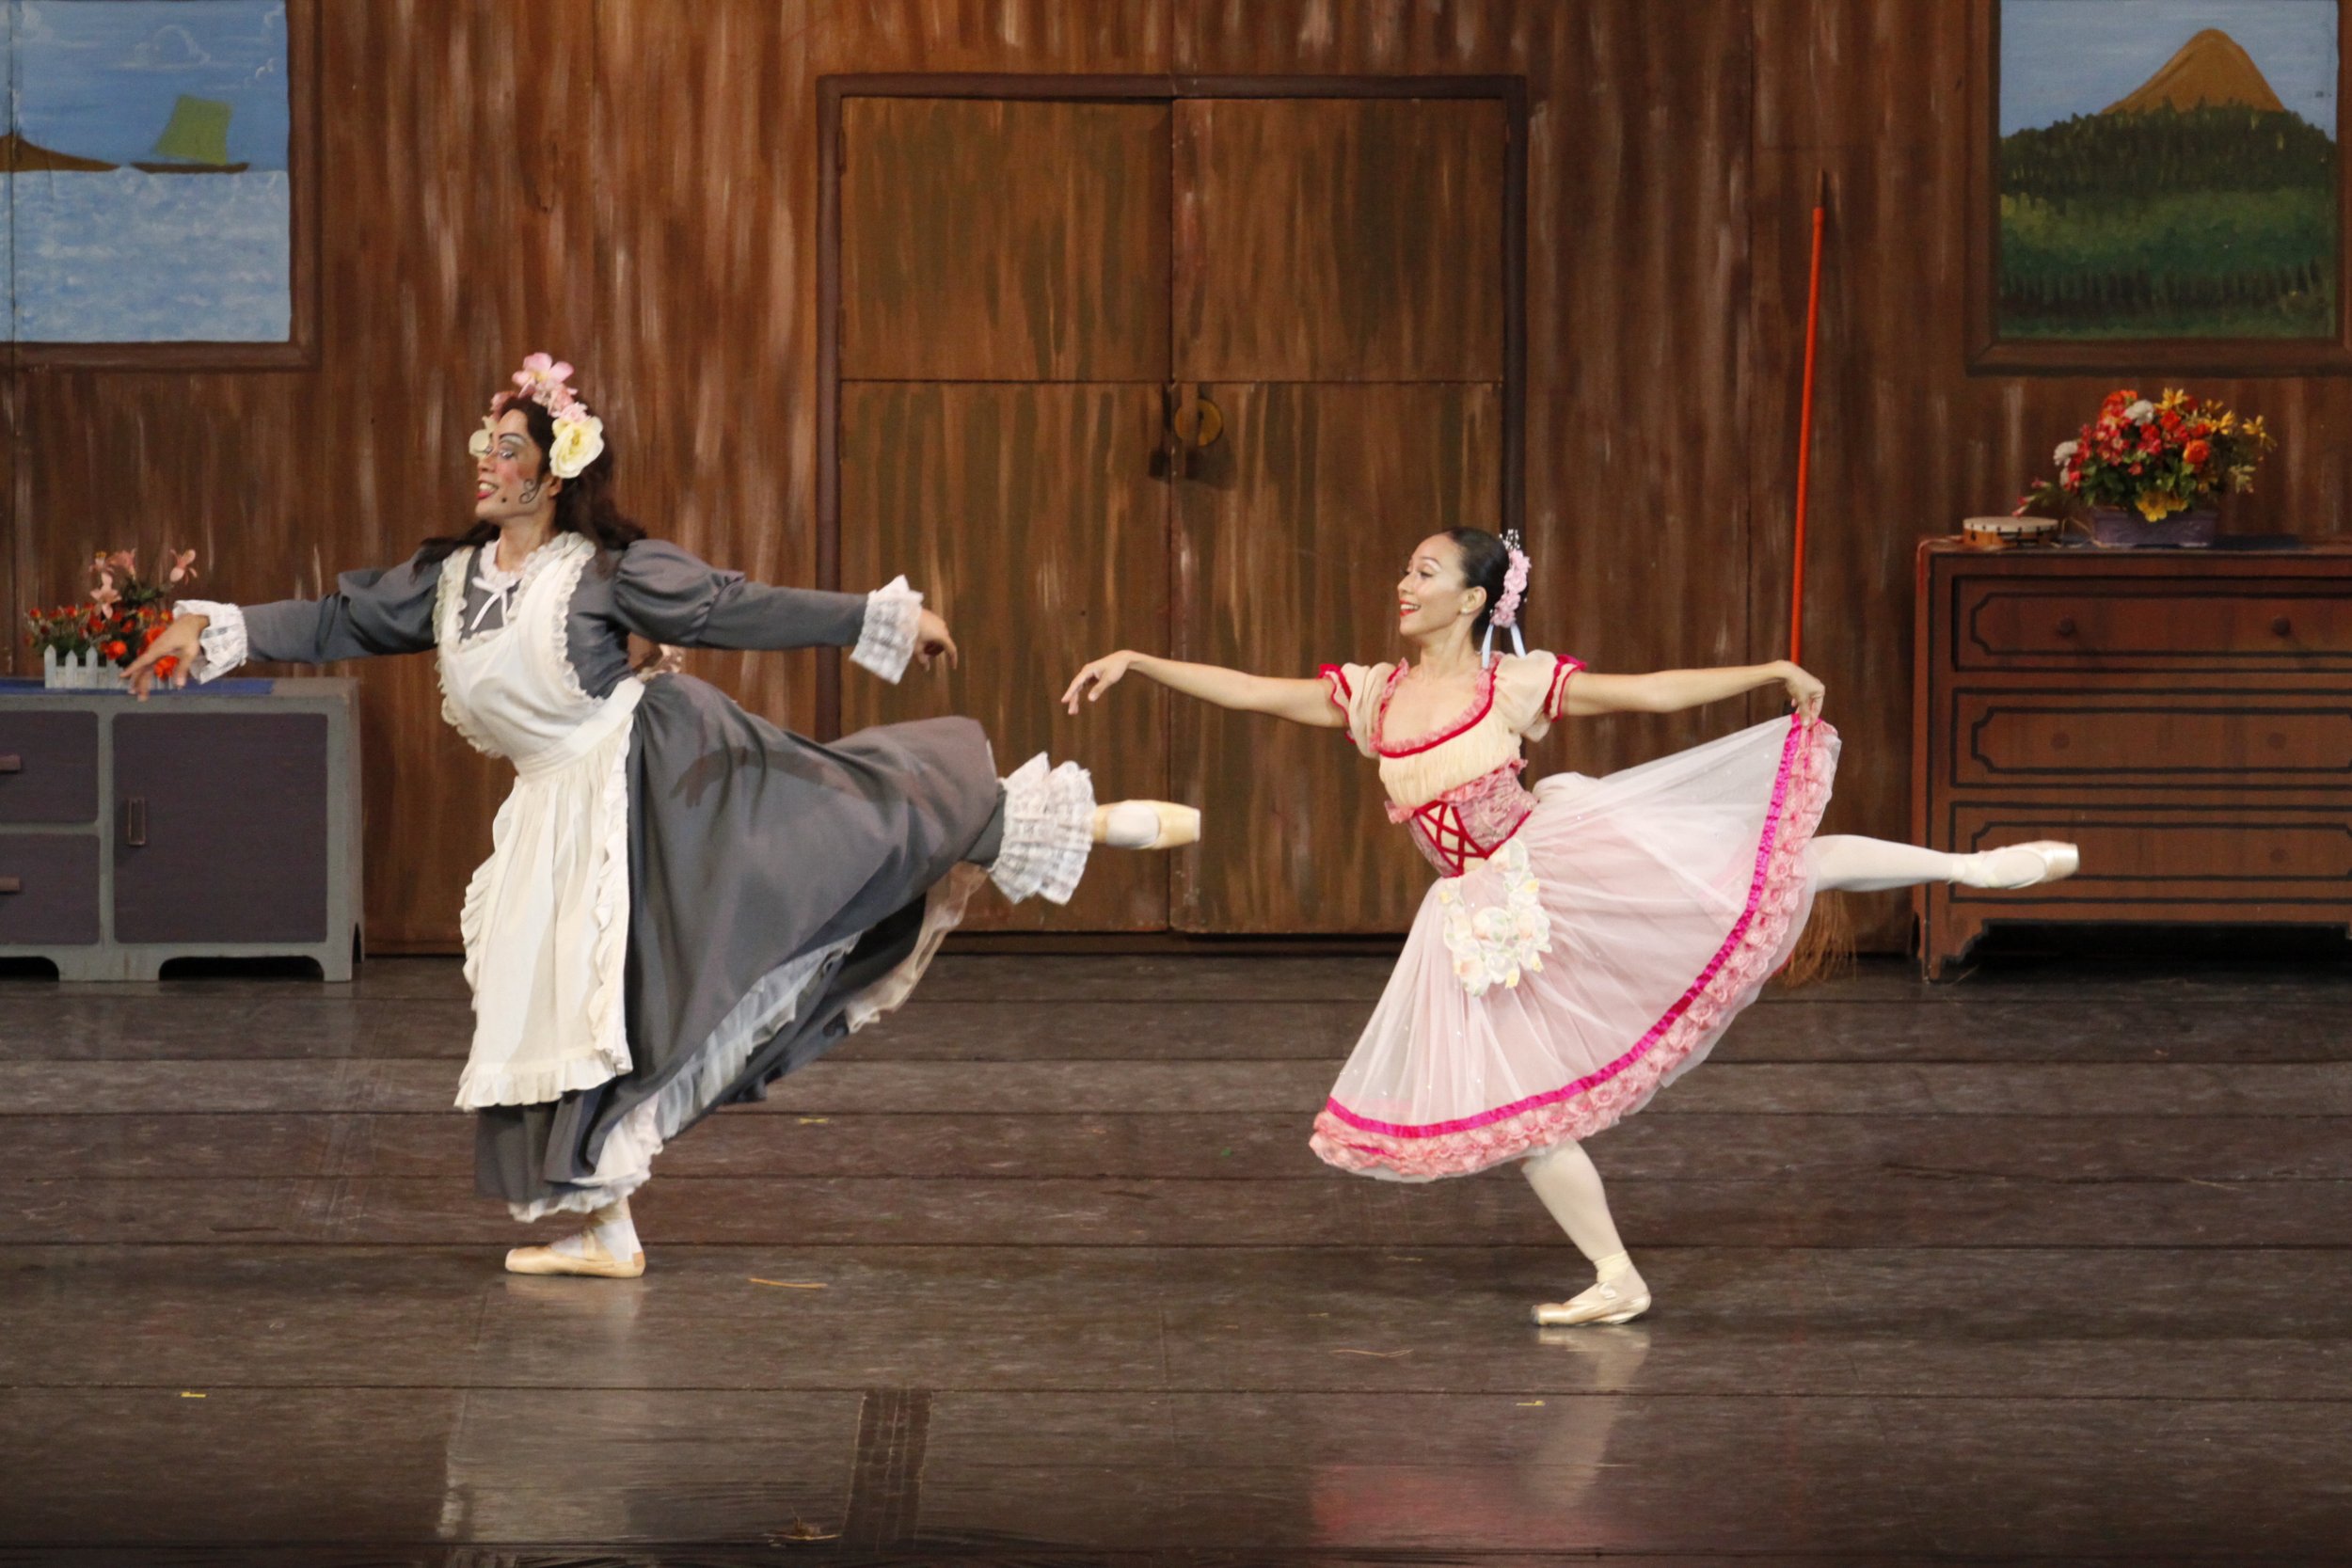    Mother Simone (Jonathan Janolo) keeps in step with daughter Lise (Mylene Aggabao) whom she tries to keep away from the young girl’s chosen partner Colas in  La Fille Mal Gardee  (2008). Photo by Ocs Alvarez   